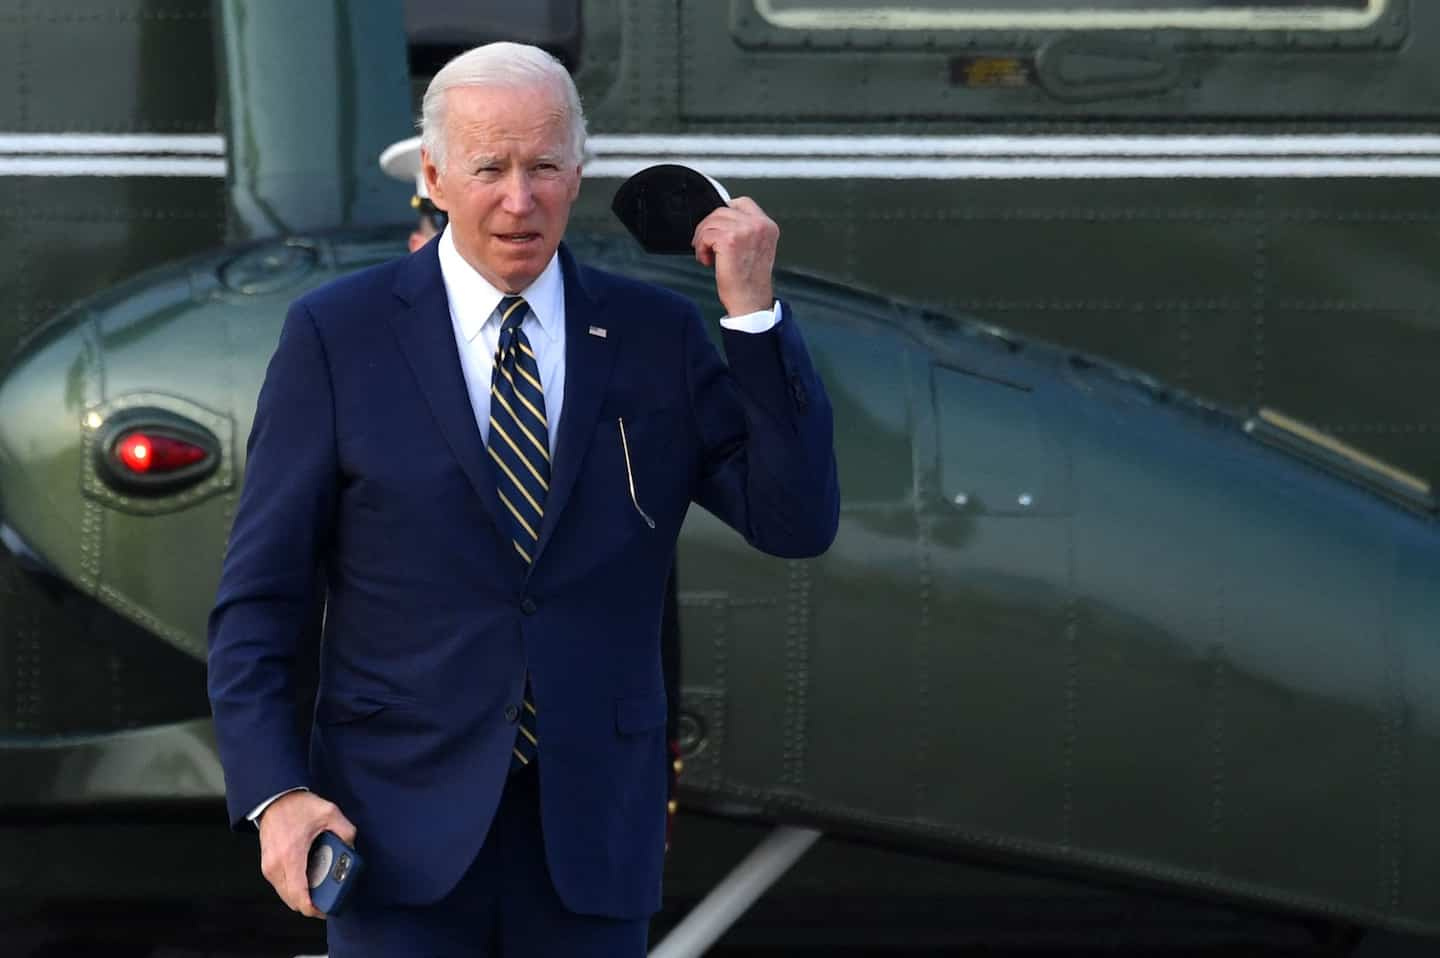 Biden likely infected with BA.5 subvariant